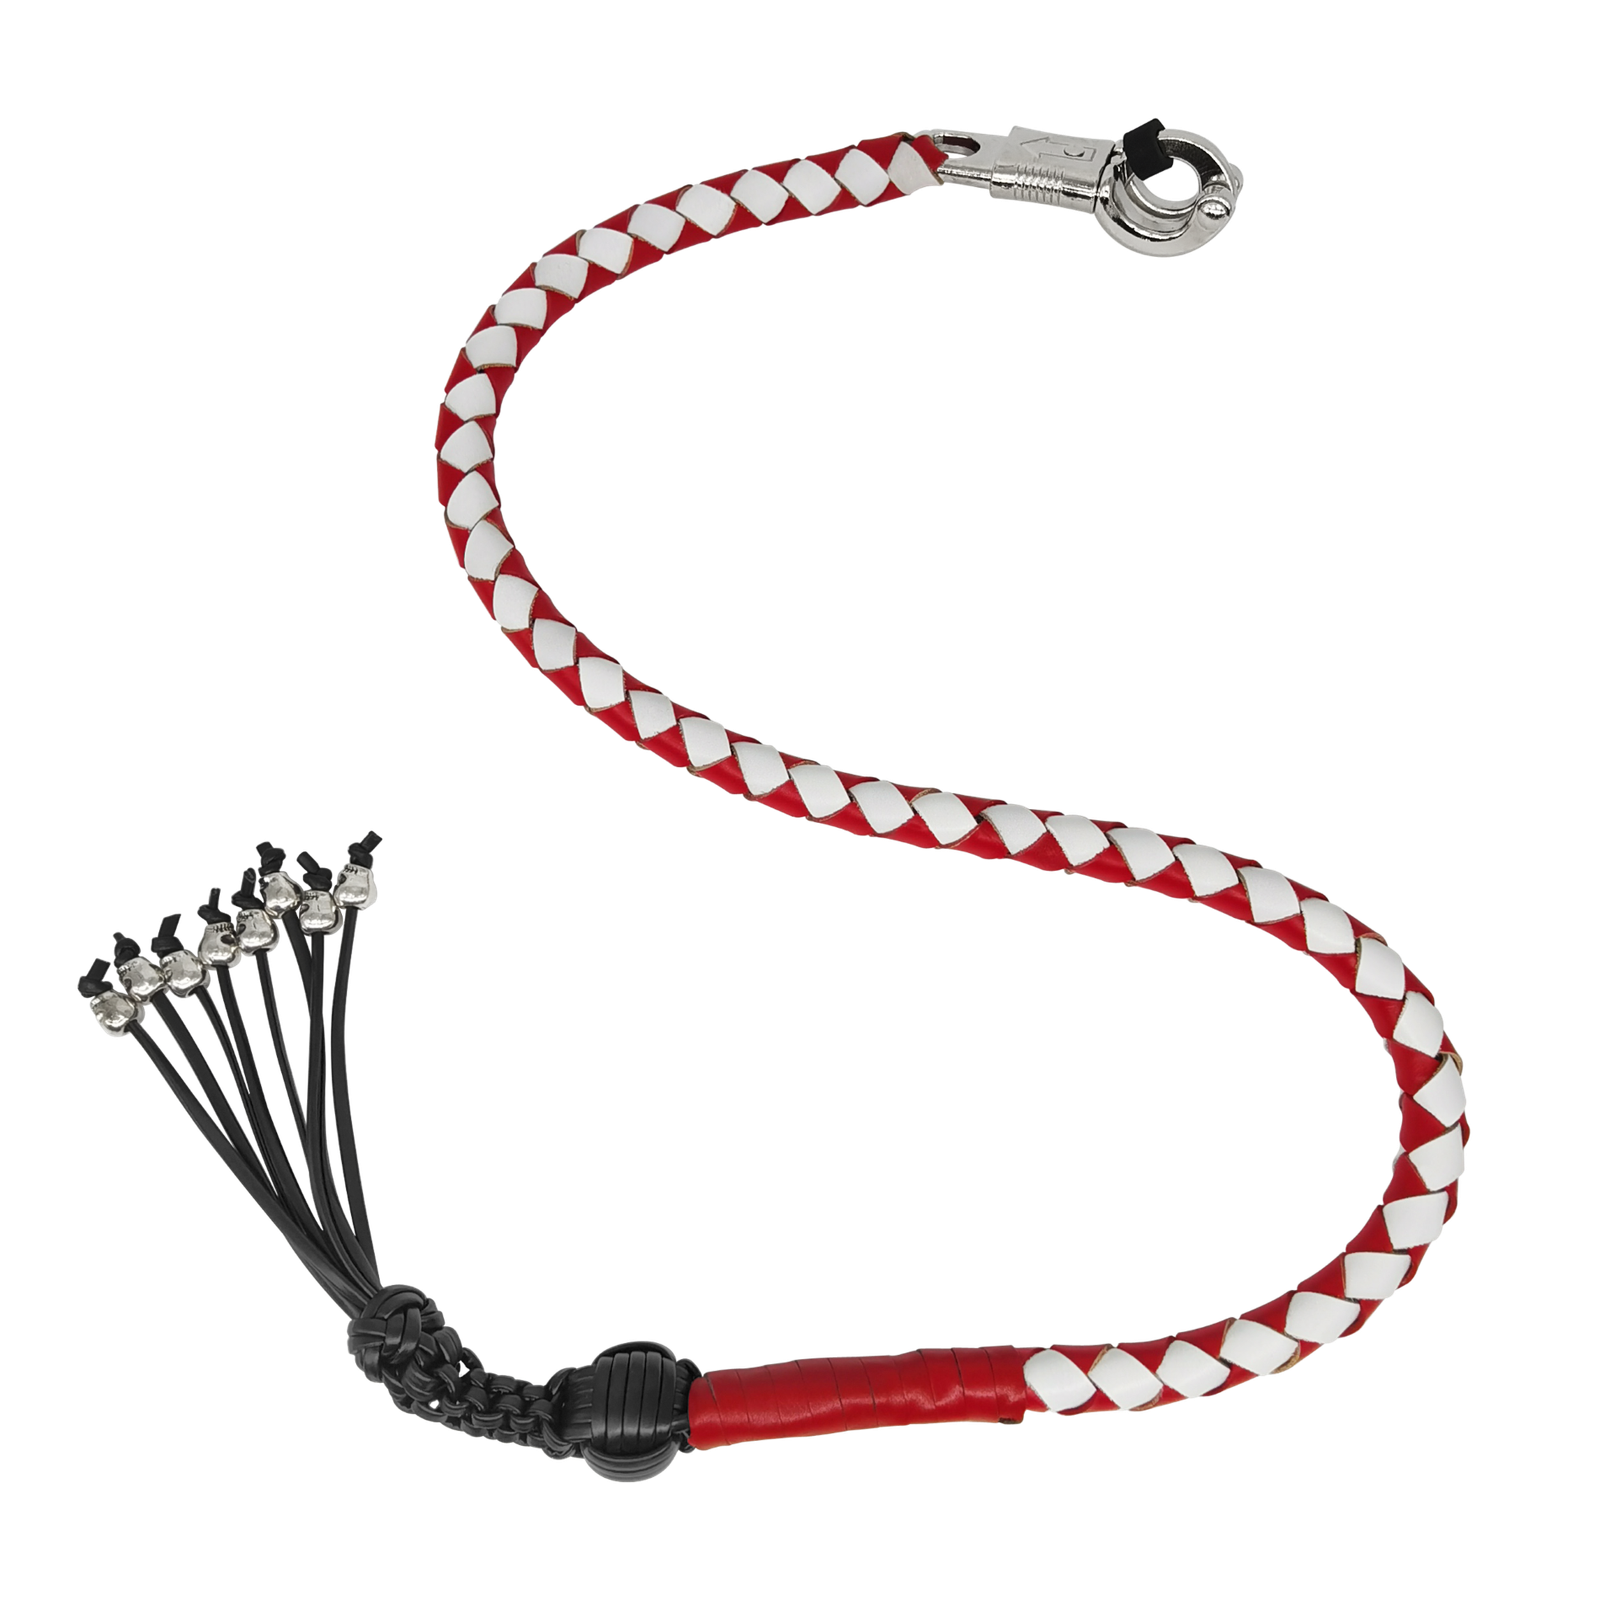 Get Back Whip - Red and White Leather - 36 Inches - Monkey Fist and Skulls - Motorcycle Accessories -  FGBW12-HS-DL